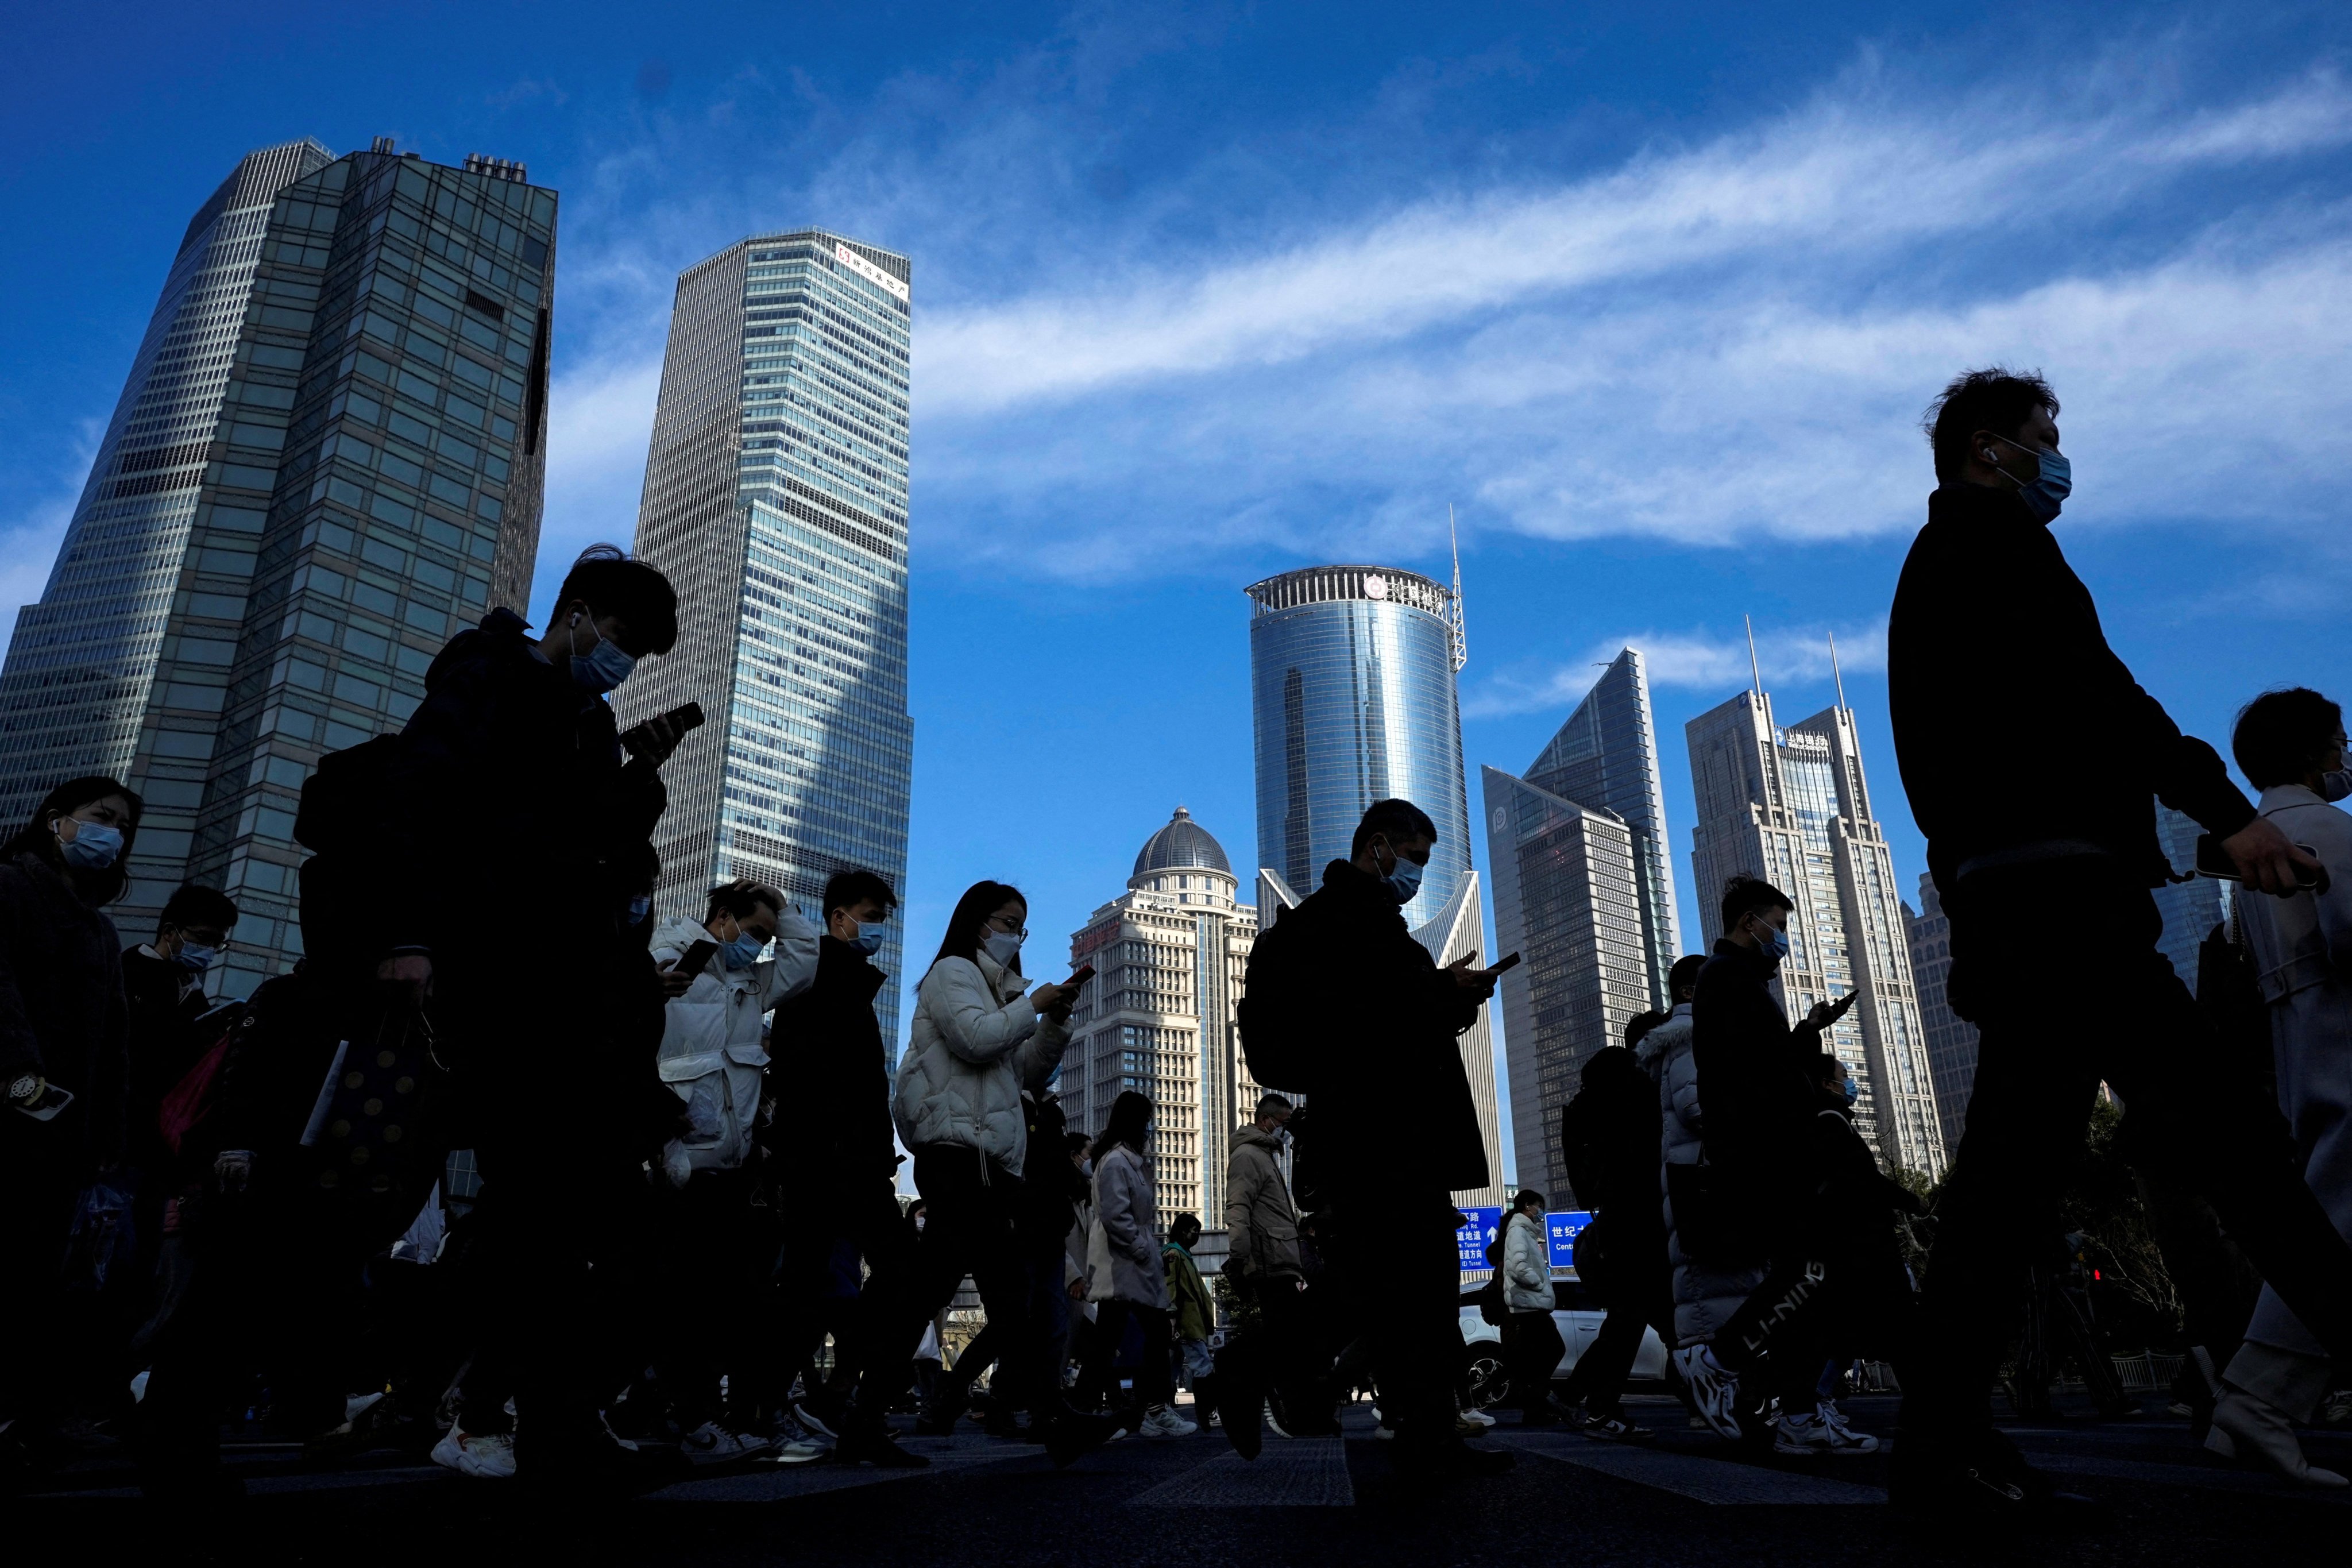 People cross a street near office towers in the Lujiazui financial district of Shanghai on February 28, 2023. Photo: Reuters